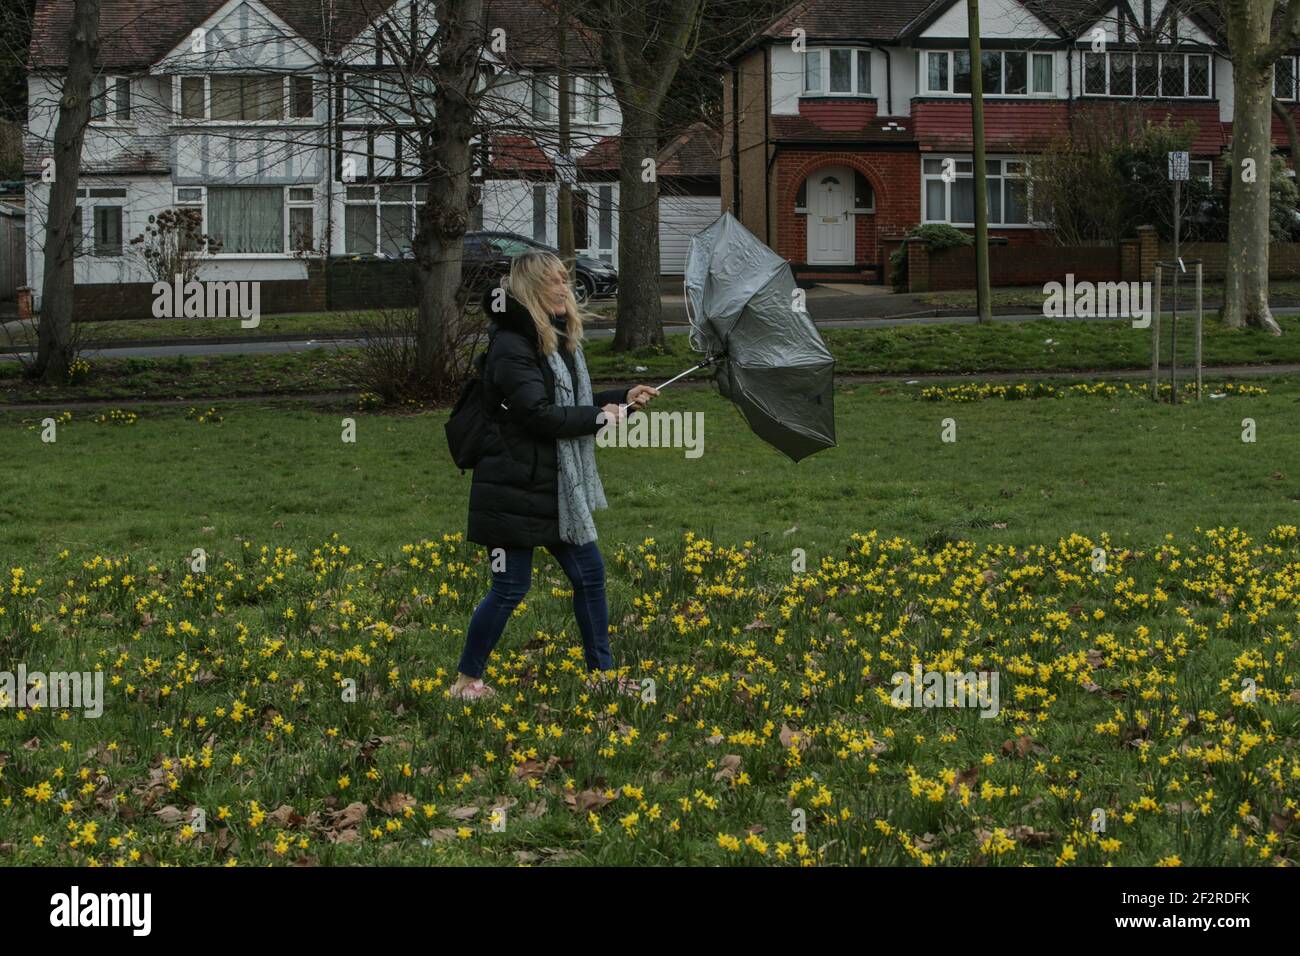 London UK 13 March 2021 A woman walks through  a park  in south London among the daffodils in a cold and very windy  day in London.Paul Quezada-Neiman/Alamy Live News Stock Photo